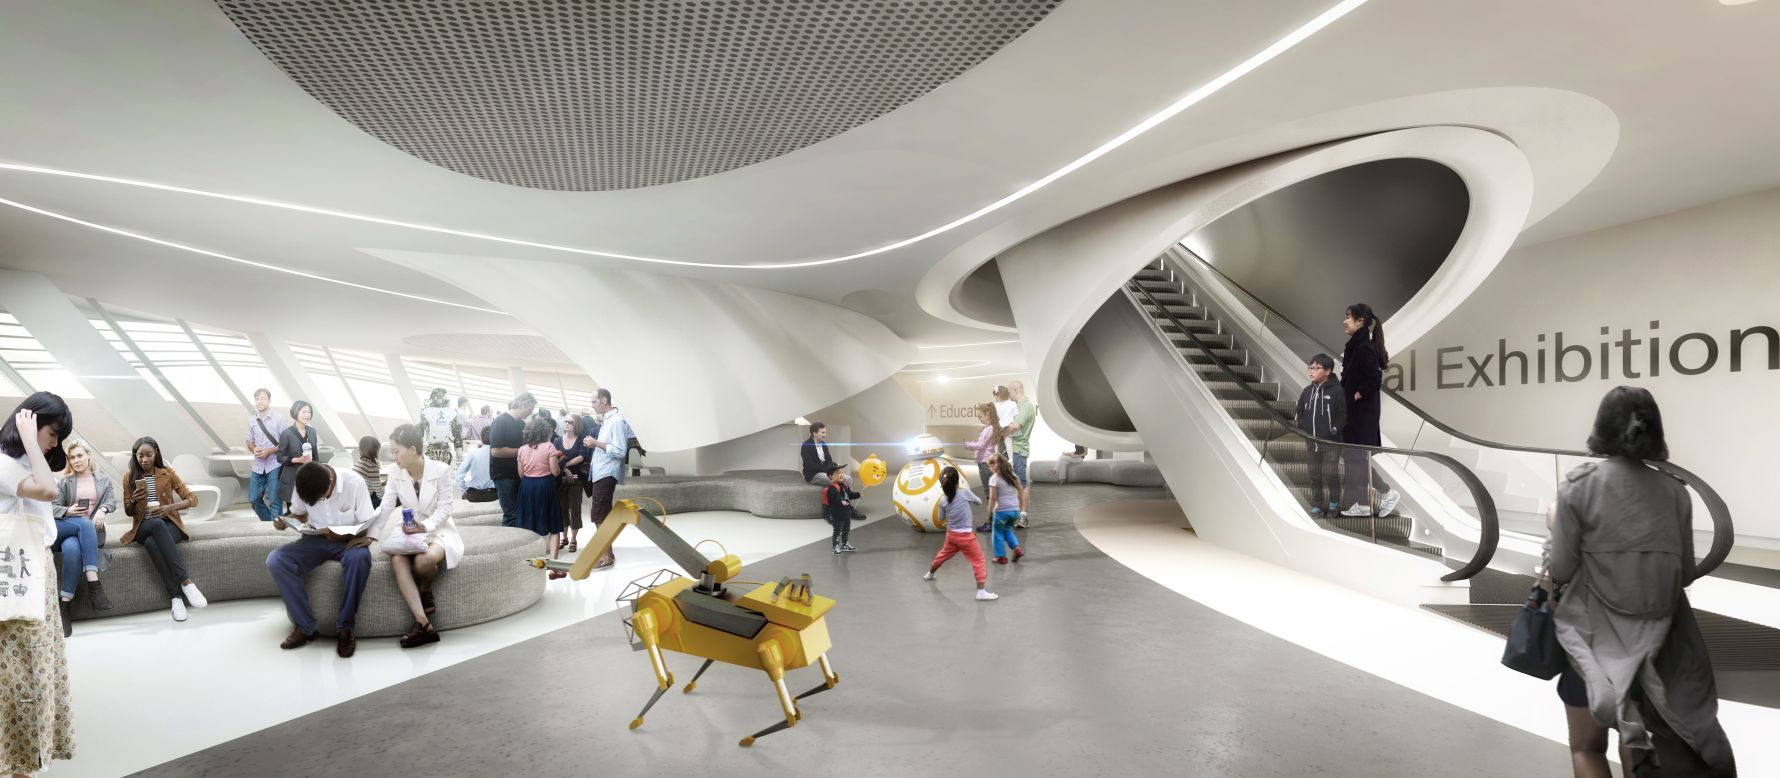 In 2019, Turkish architecture practice Melike Altınışık Architects won an international competition hosted by The Seoul Metropolitan Government to design the Robot & AI Museum. As seen in this rendering of the lobby, the museum is set to become a hub for smart technologies that visitors can interact with. 